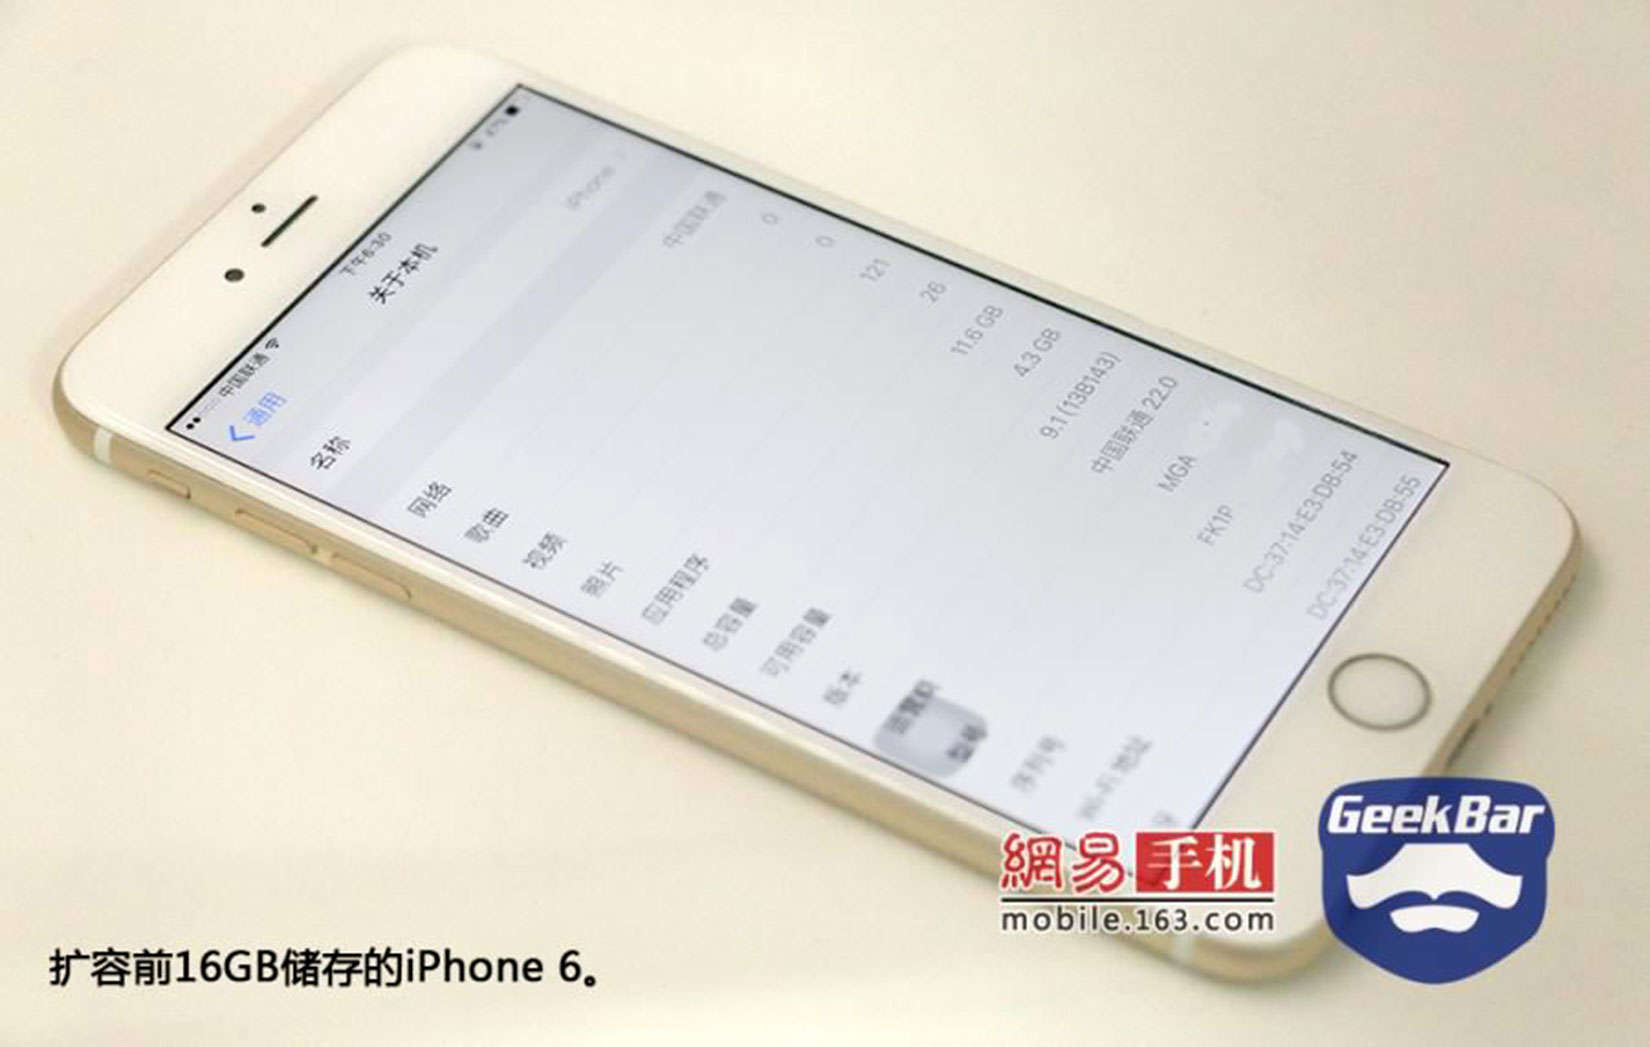 In China, a 16GB iPhone 6 can be upgraded to 128GB for $100 or less.